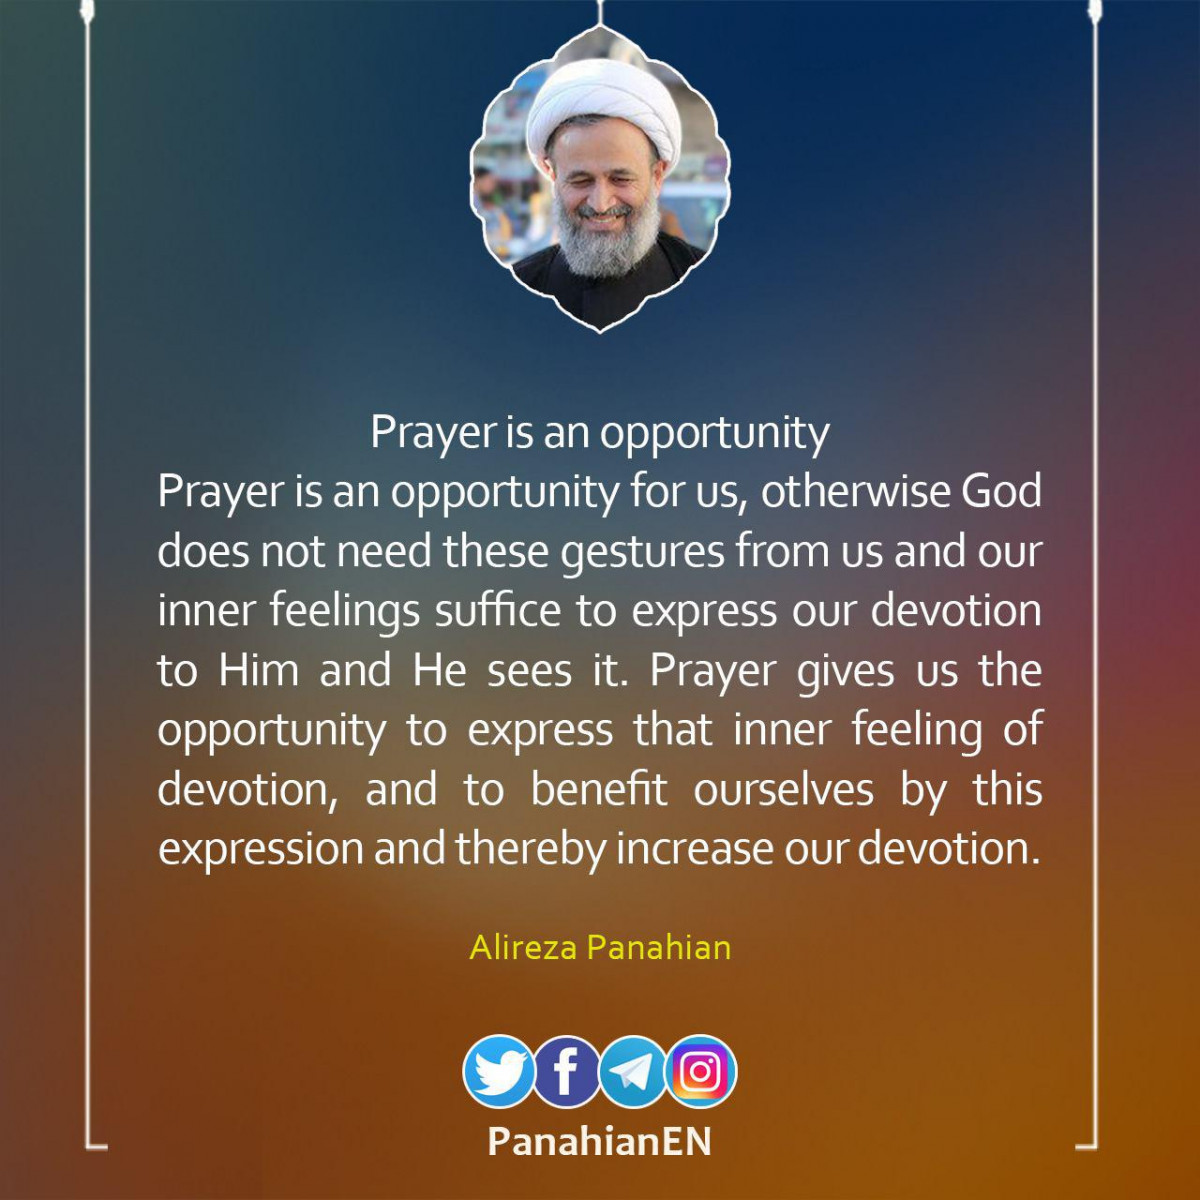 Prayer is an opportunity